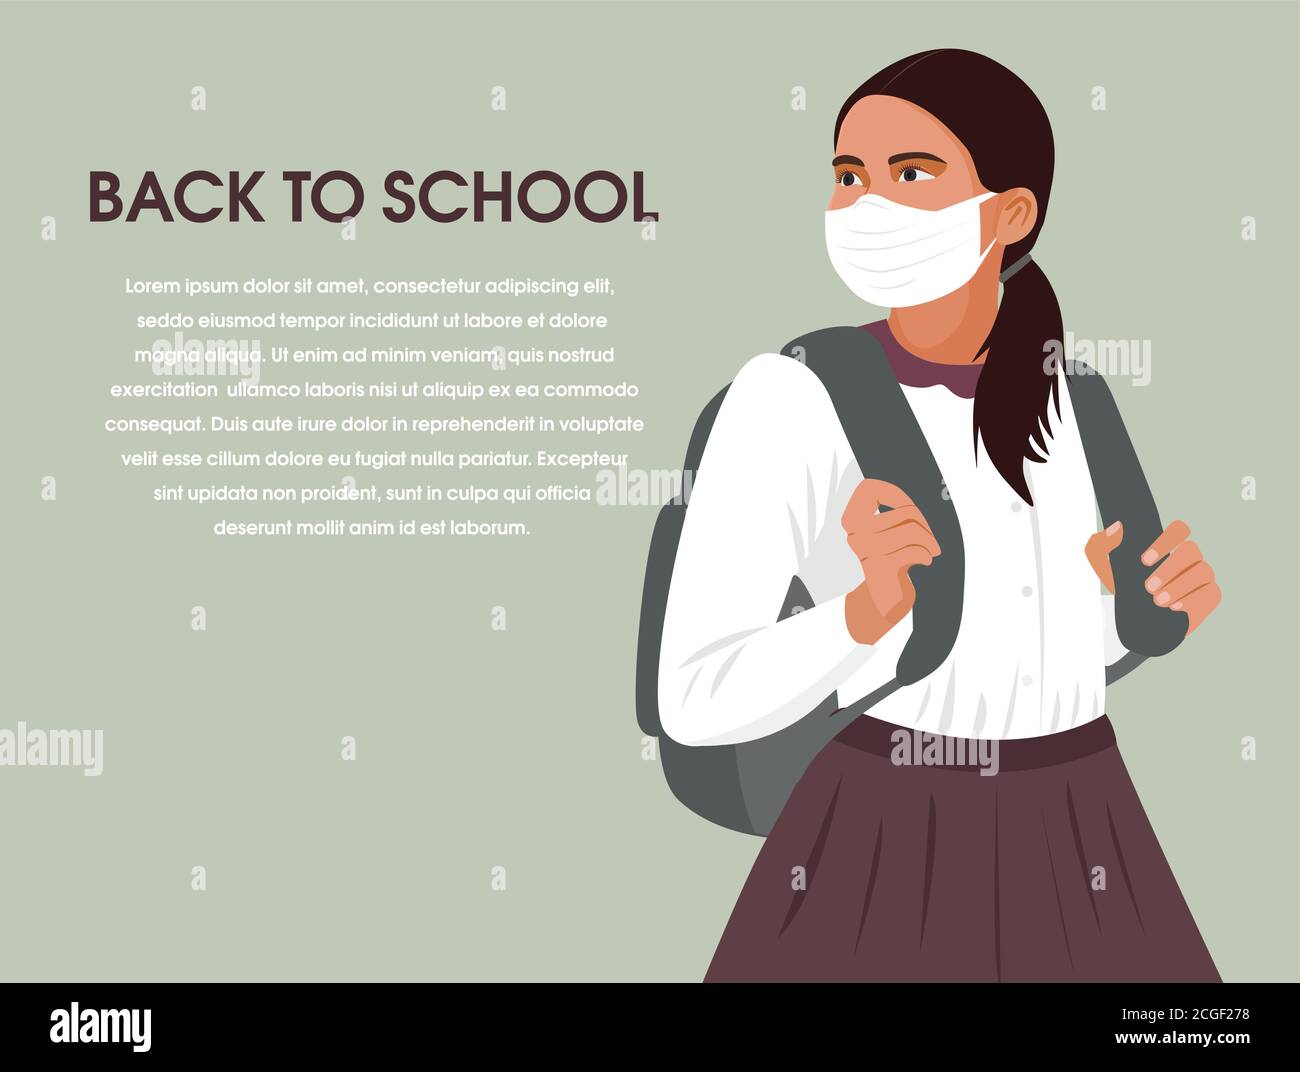 Back to school concept illustration schoolgirl with protective face mask.Coronavirus New normal for education. Schoolgirl go to school during COVID-19 Stock Vector